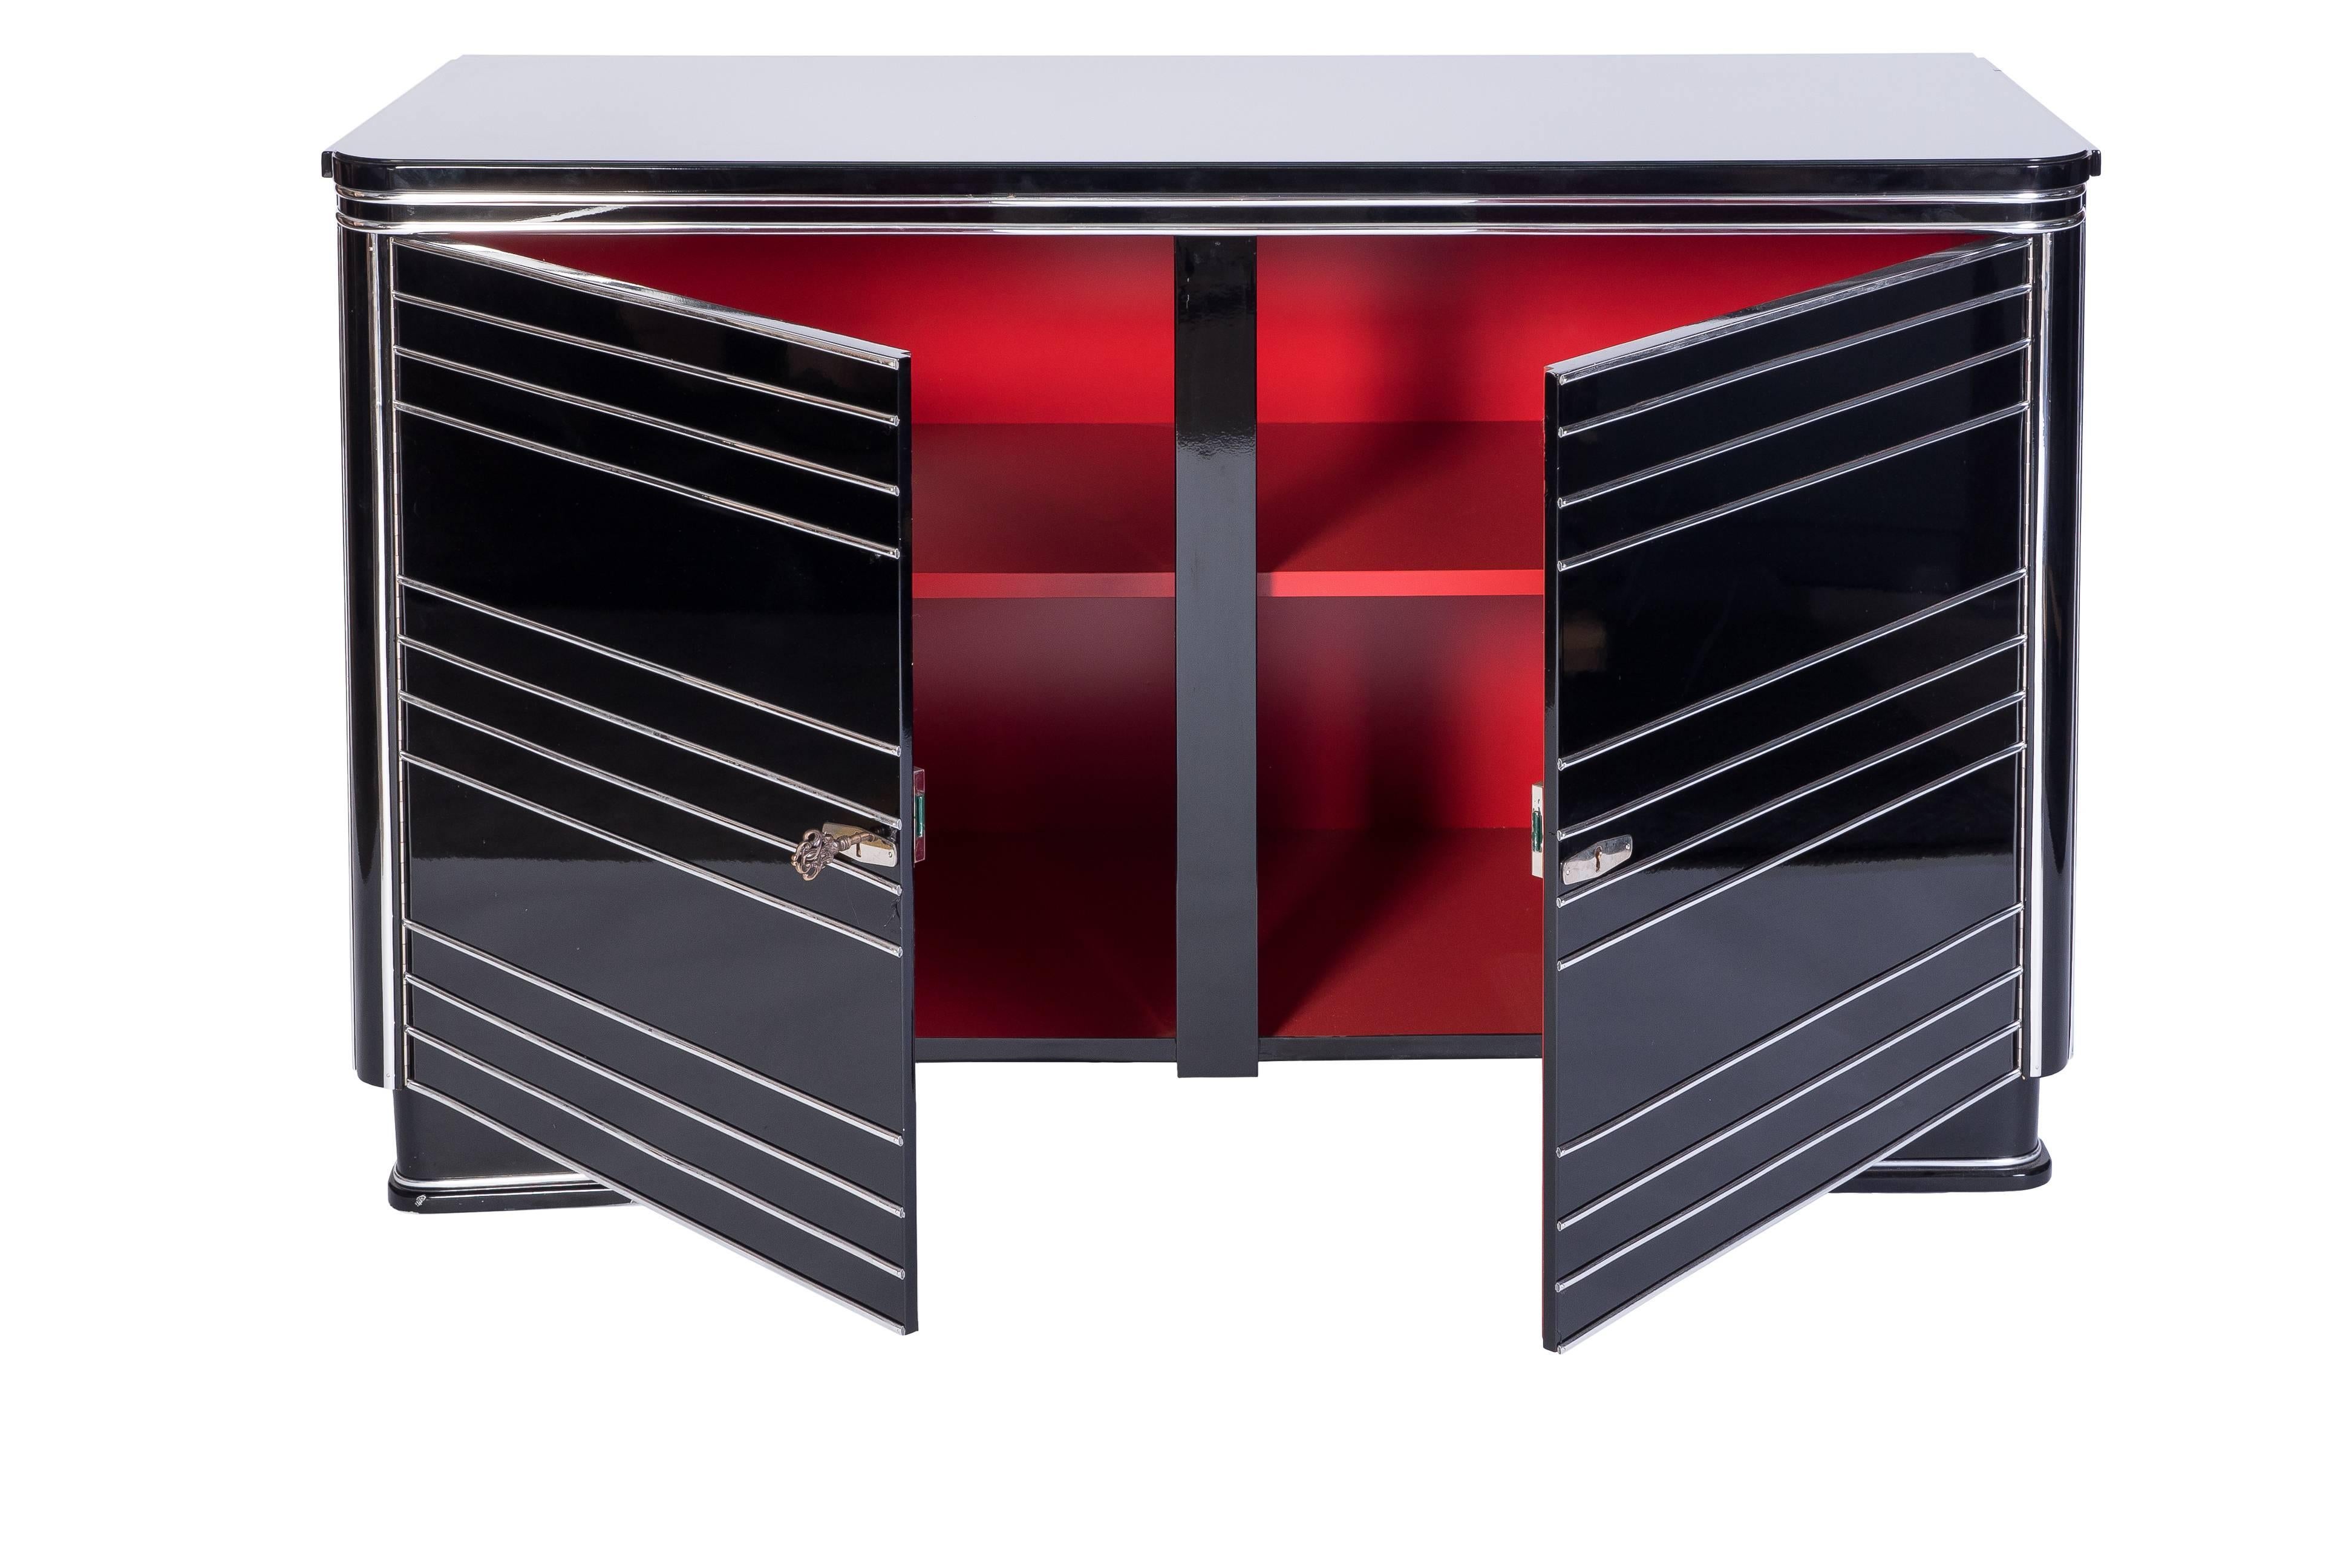 This French Art Deco commode features a streamlined design with chrome lines cascading throughout the entire piece, with chrome applications on the doors, a cherry red interior and a high gloss black lacquer exterior.

Made in France, circa